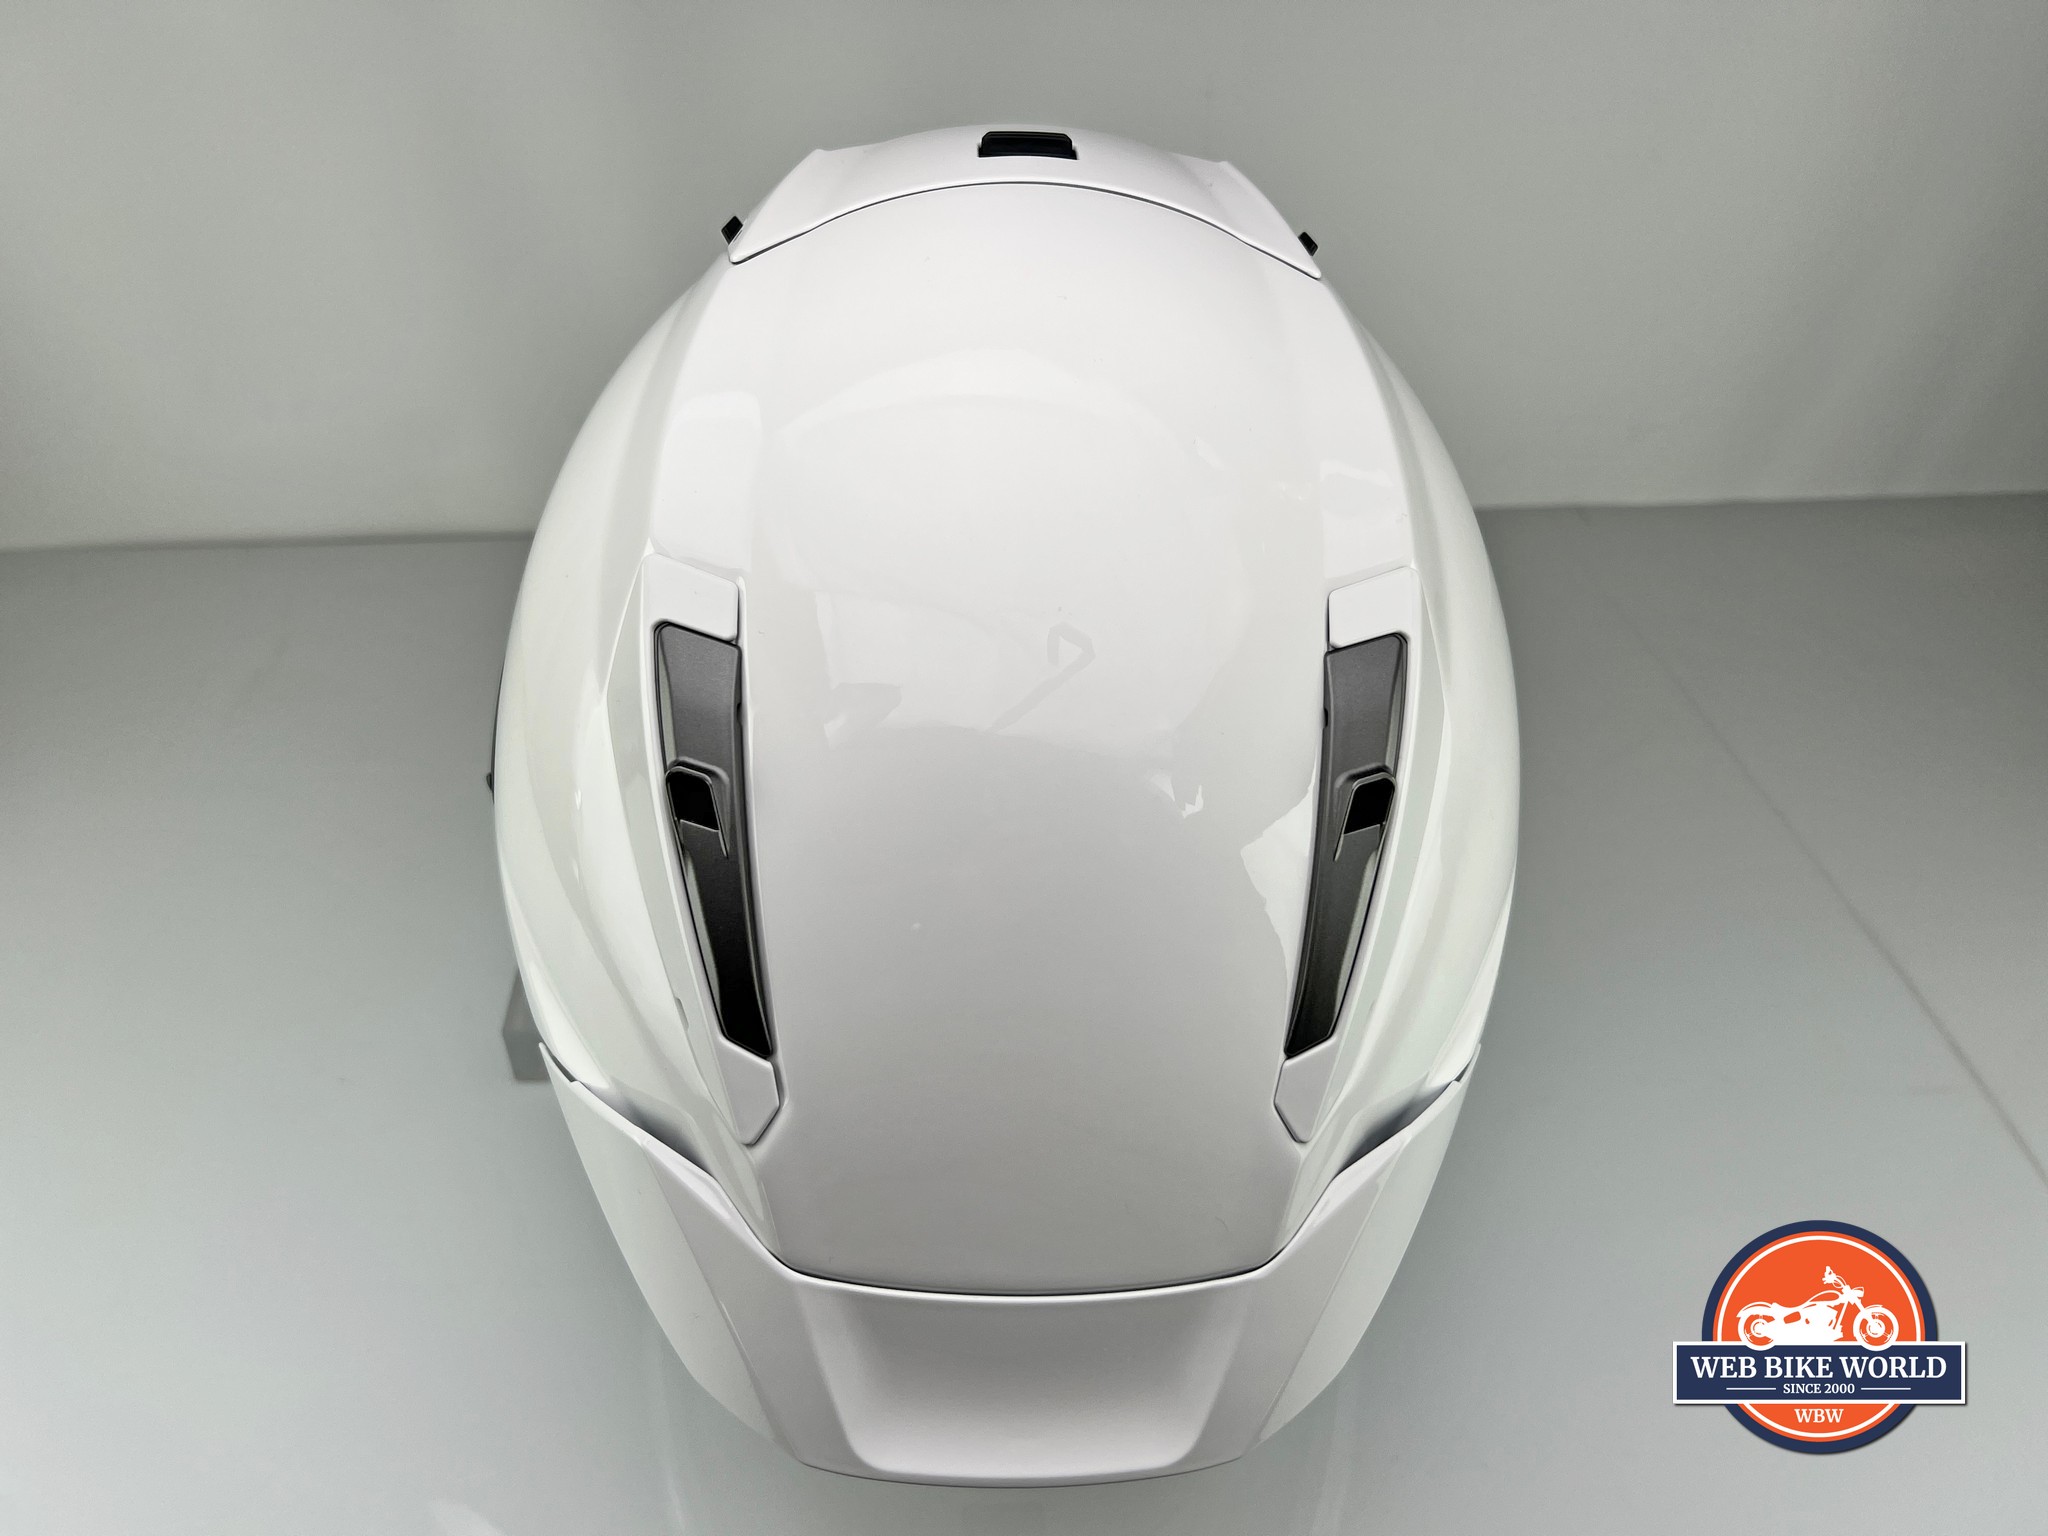 The top view of the X15 shows the aerodynamic nature of the shell.